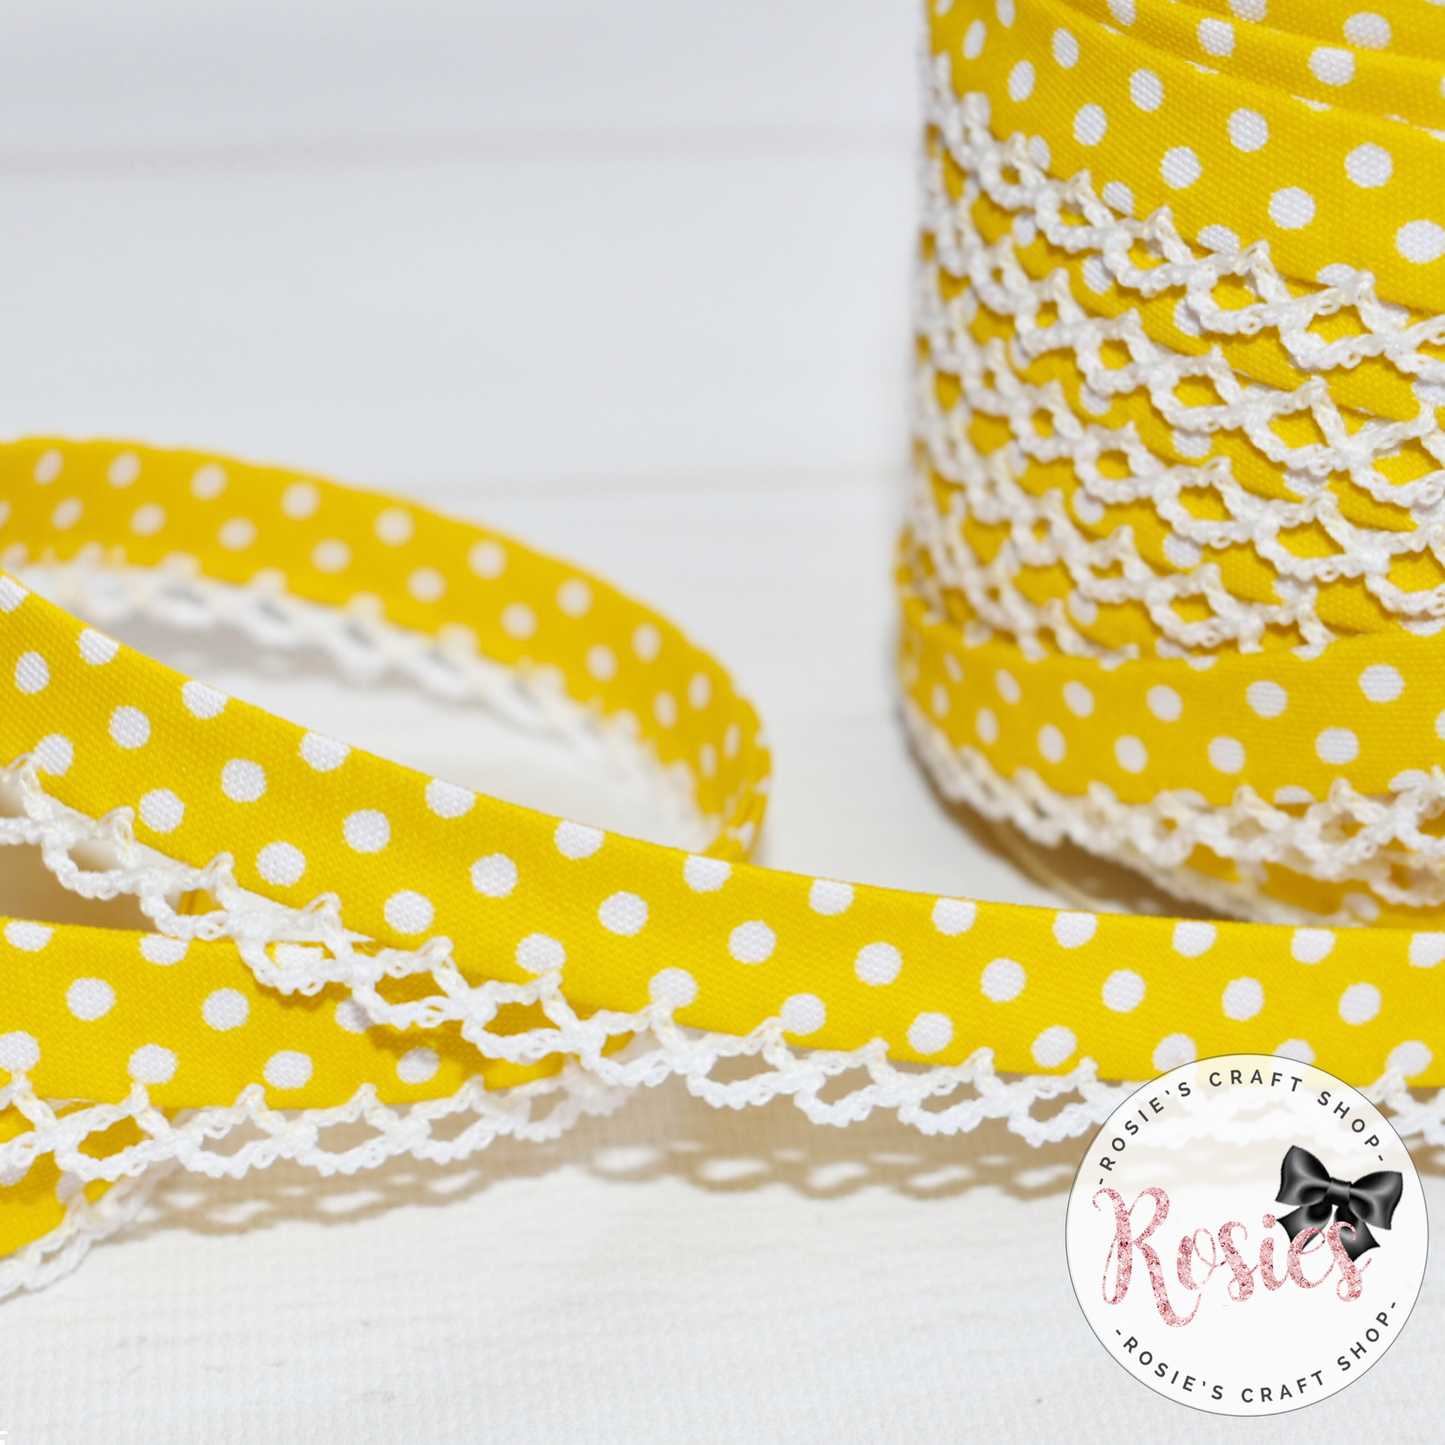 12mm Yellow with White Polka Dots Pre-Folded Bias Binding with Scallop Lace Edge - Rosie's Craft Shop Ltd